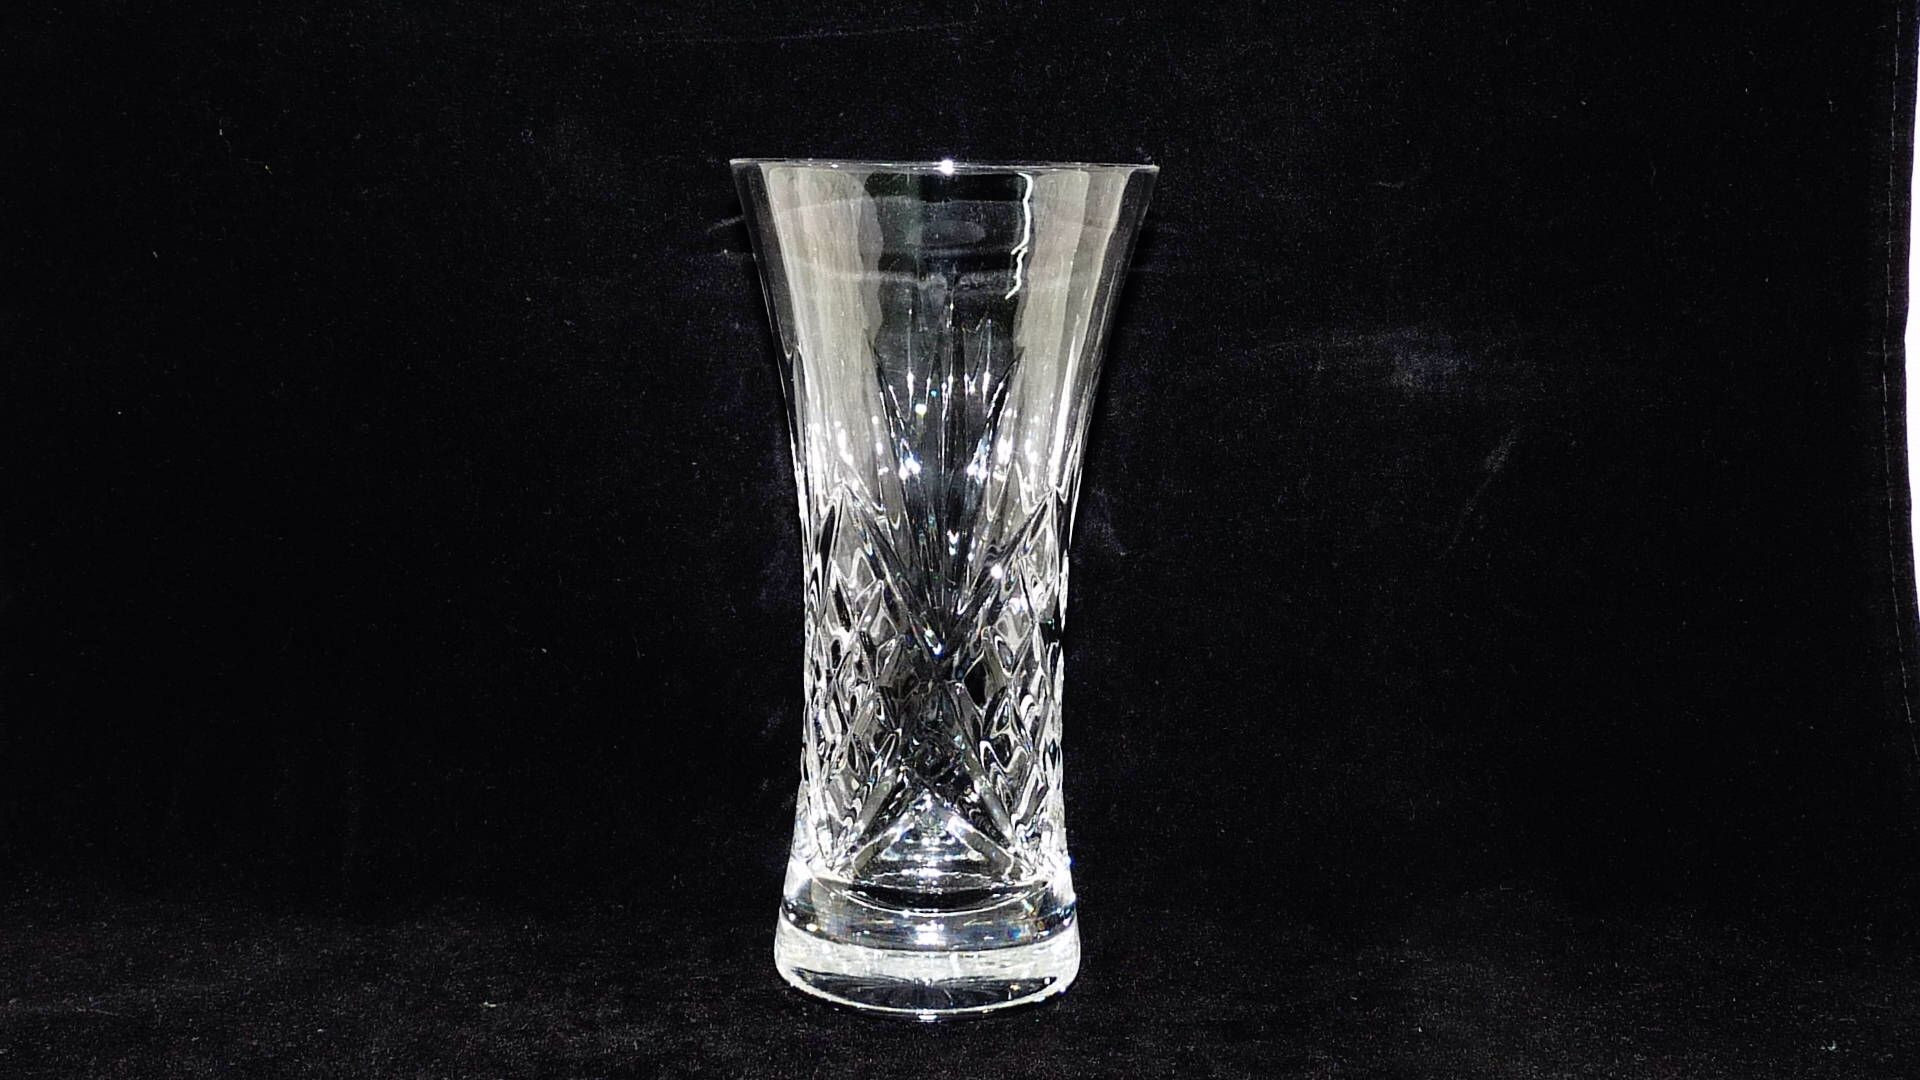 28 Awesome Short Glass Cylinder Vases 2022 free download short glass cylinder vases of excited to share the latest addition to my etsy shop small glass for excited to share the latest addition to my etsy shop small glass vase